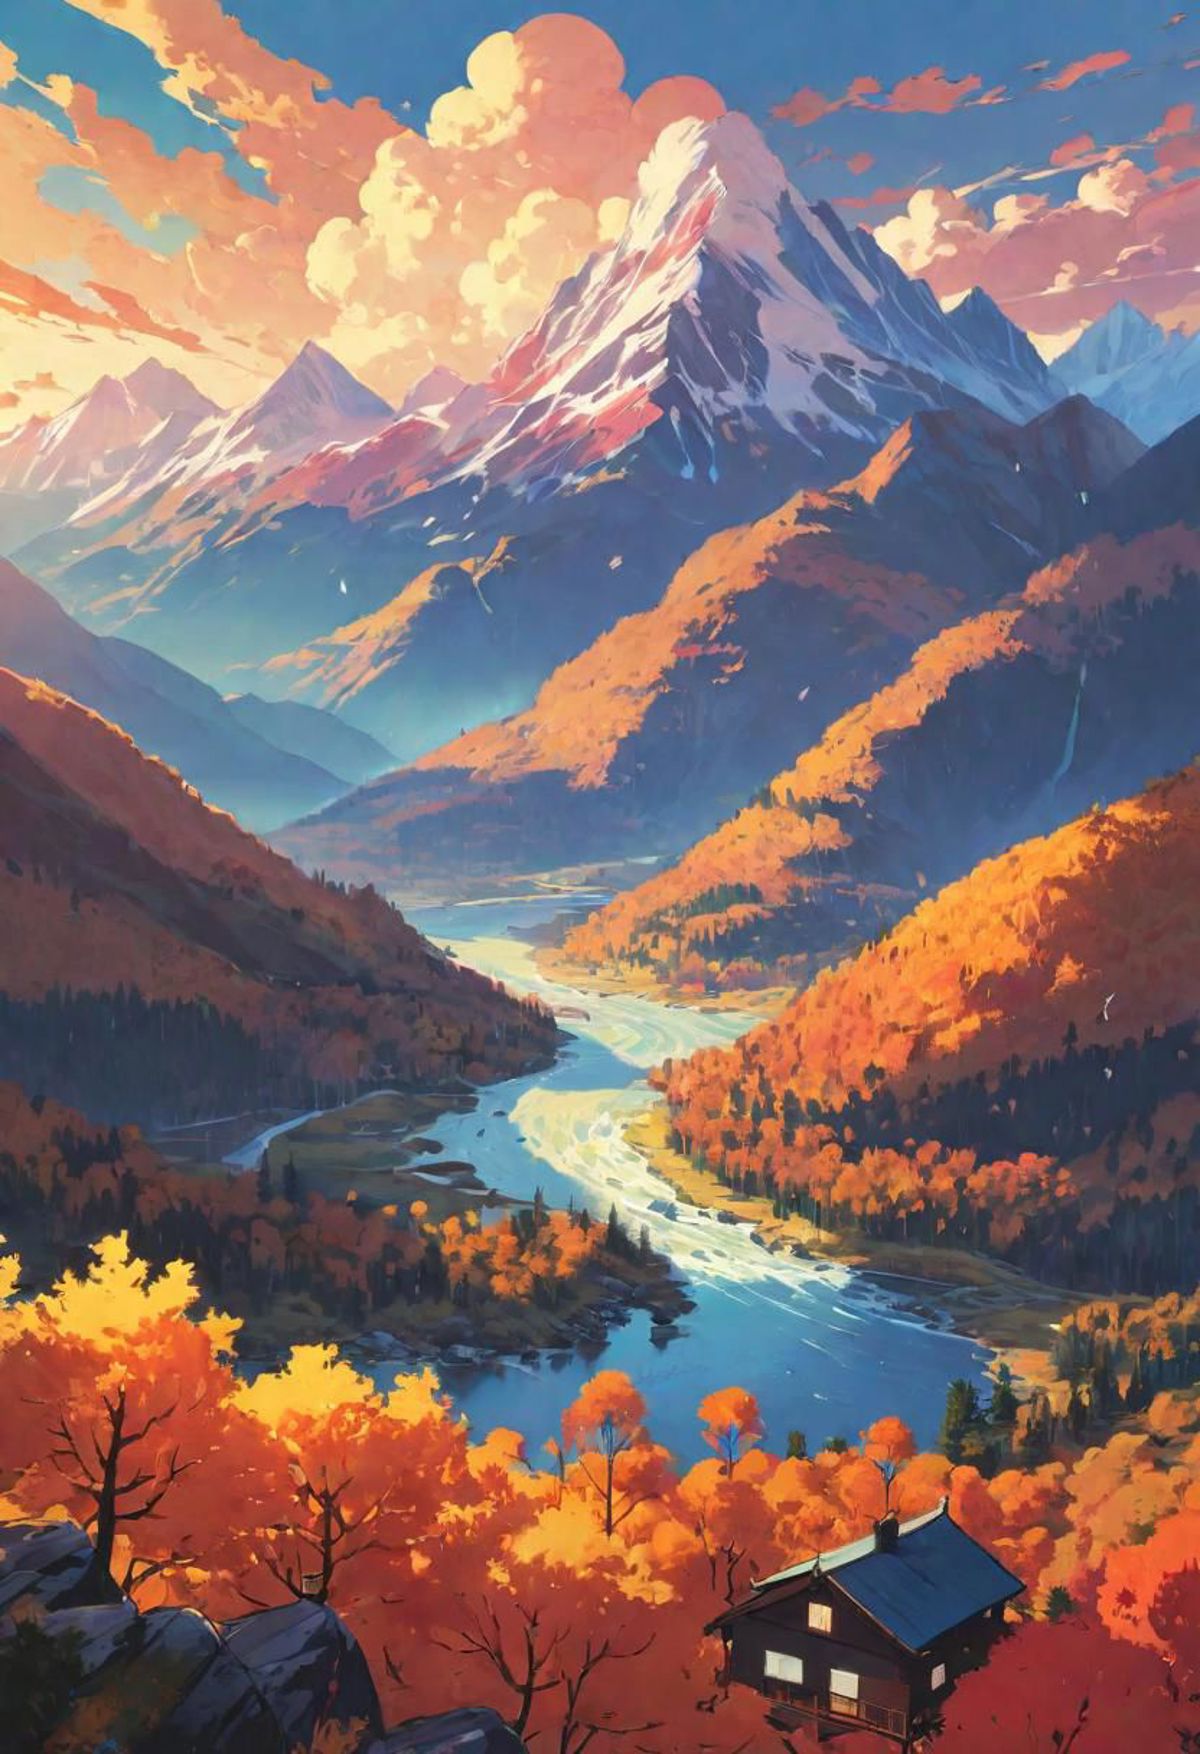 A Mountain Valley Scenery with a River and Trees